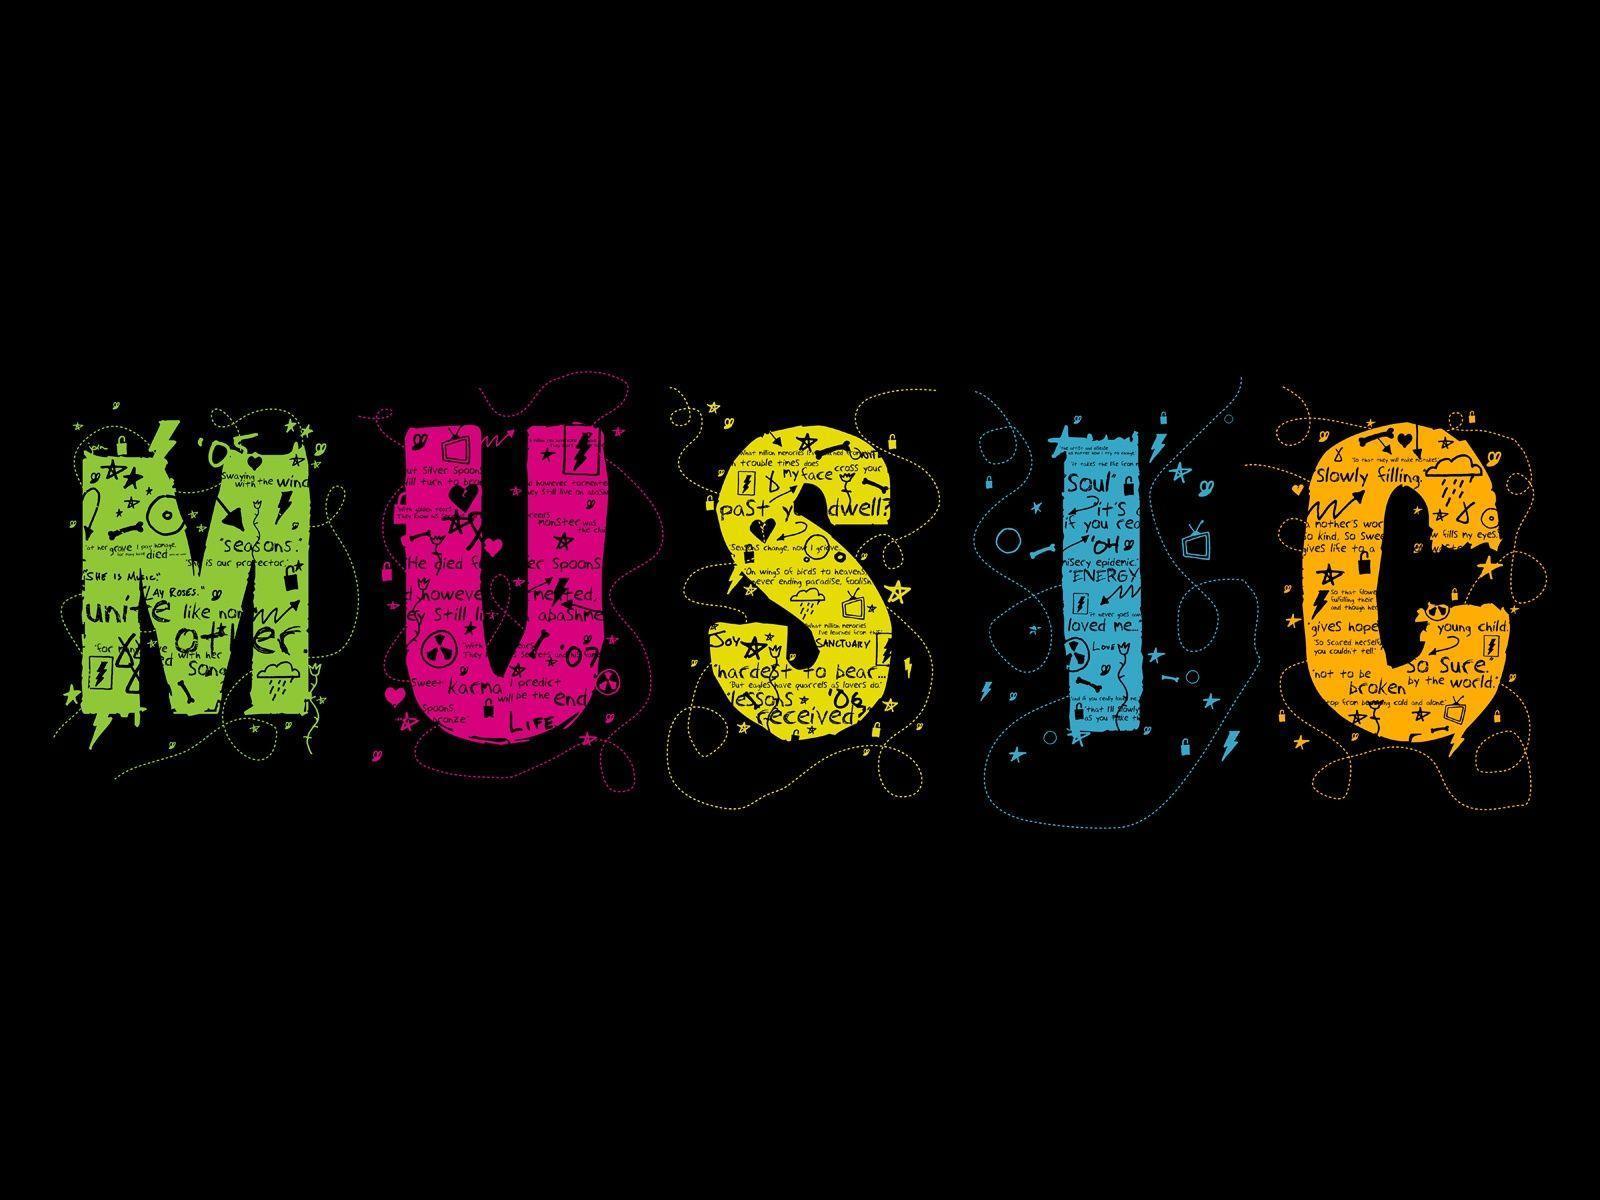 image about Music. Music is life, Music notes